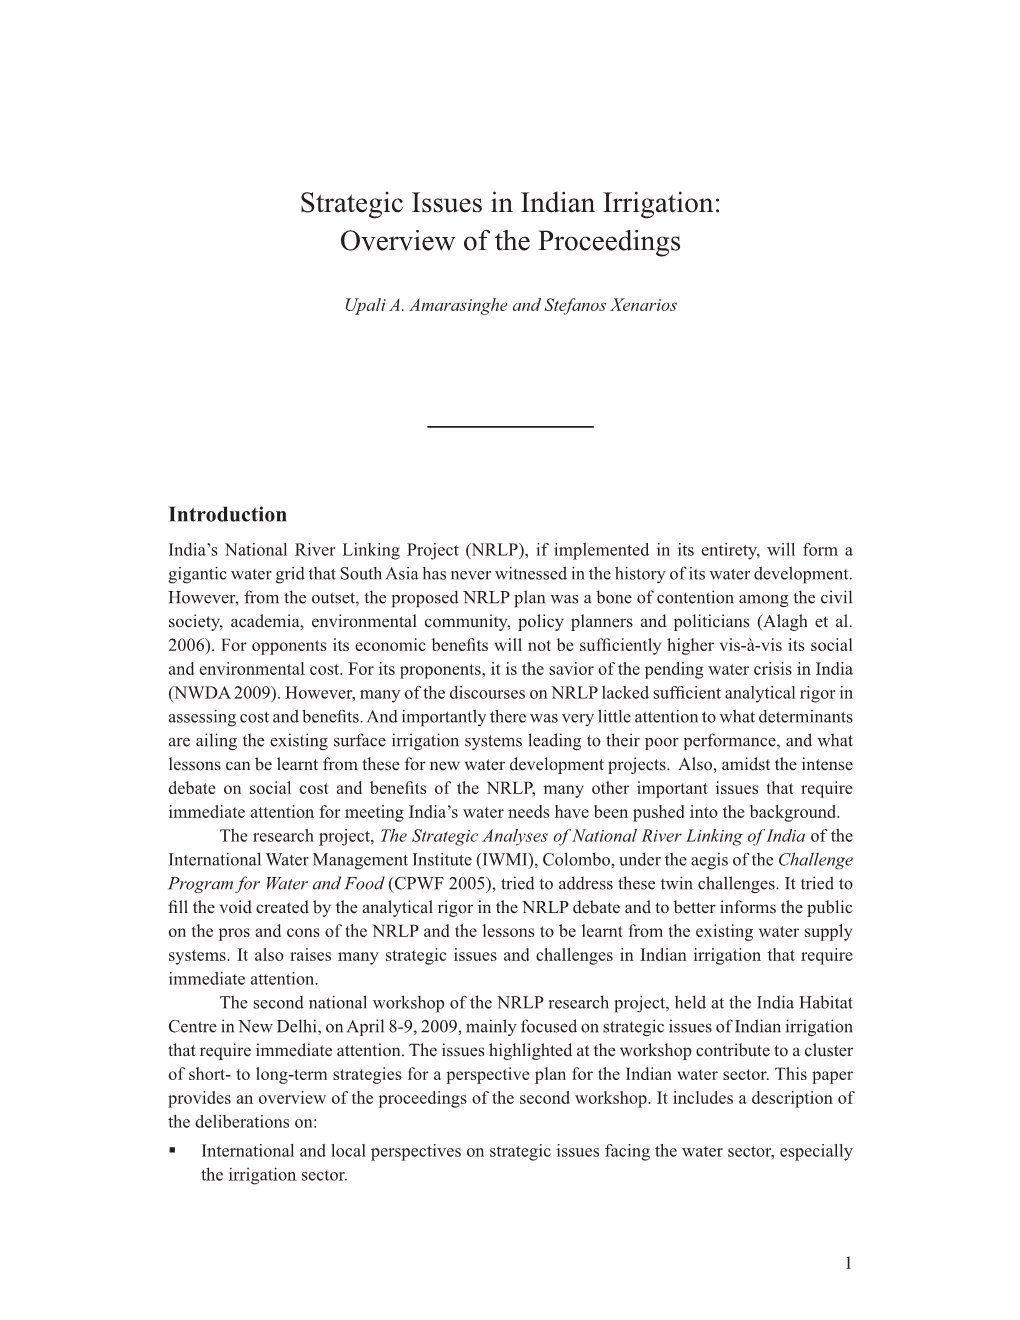 Strategic Issues in Indian Irrigation: Overview of the Proceedings